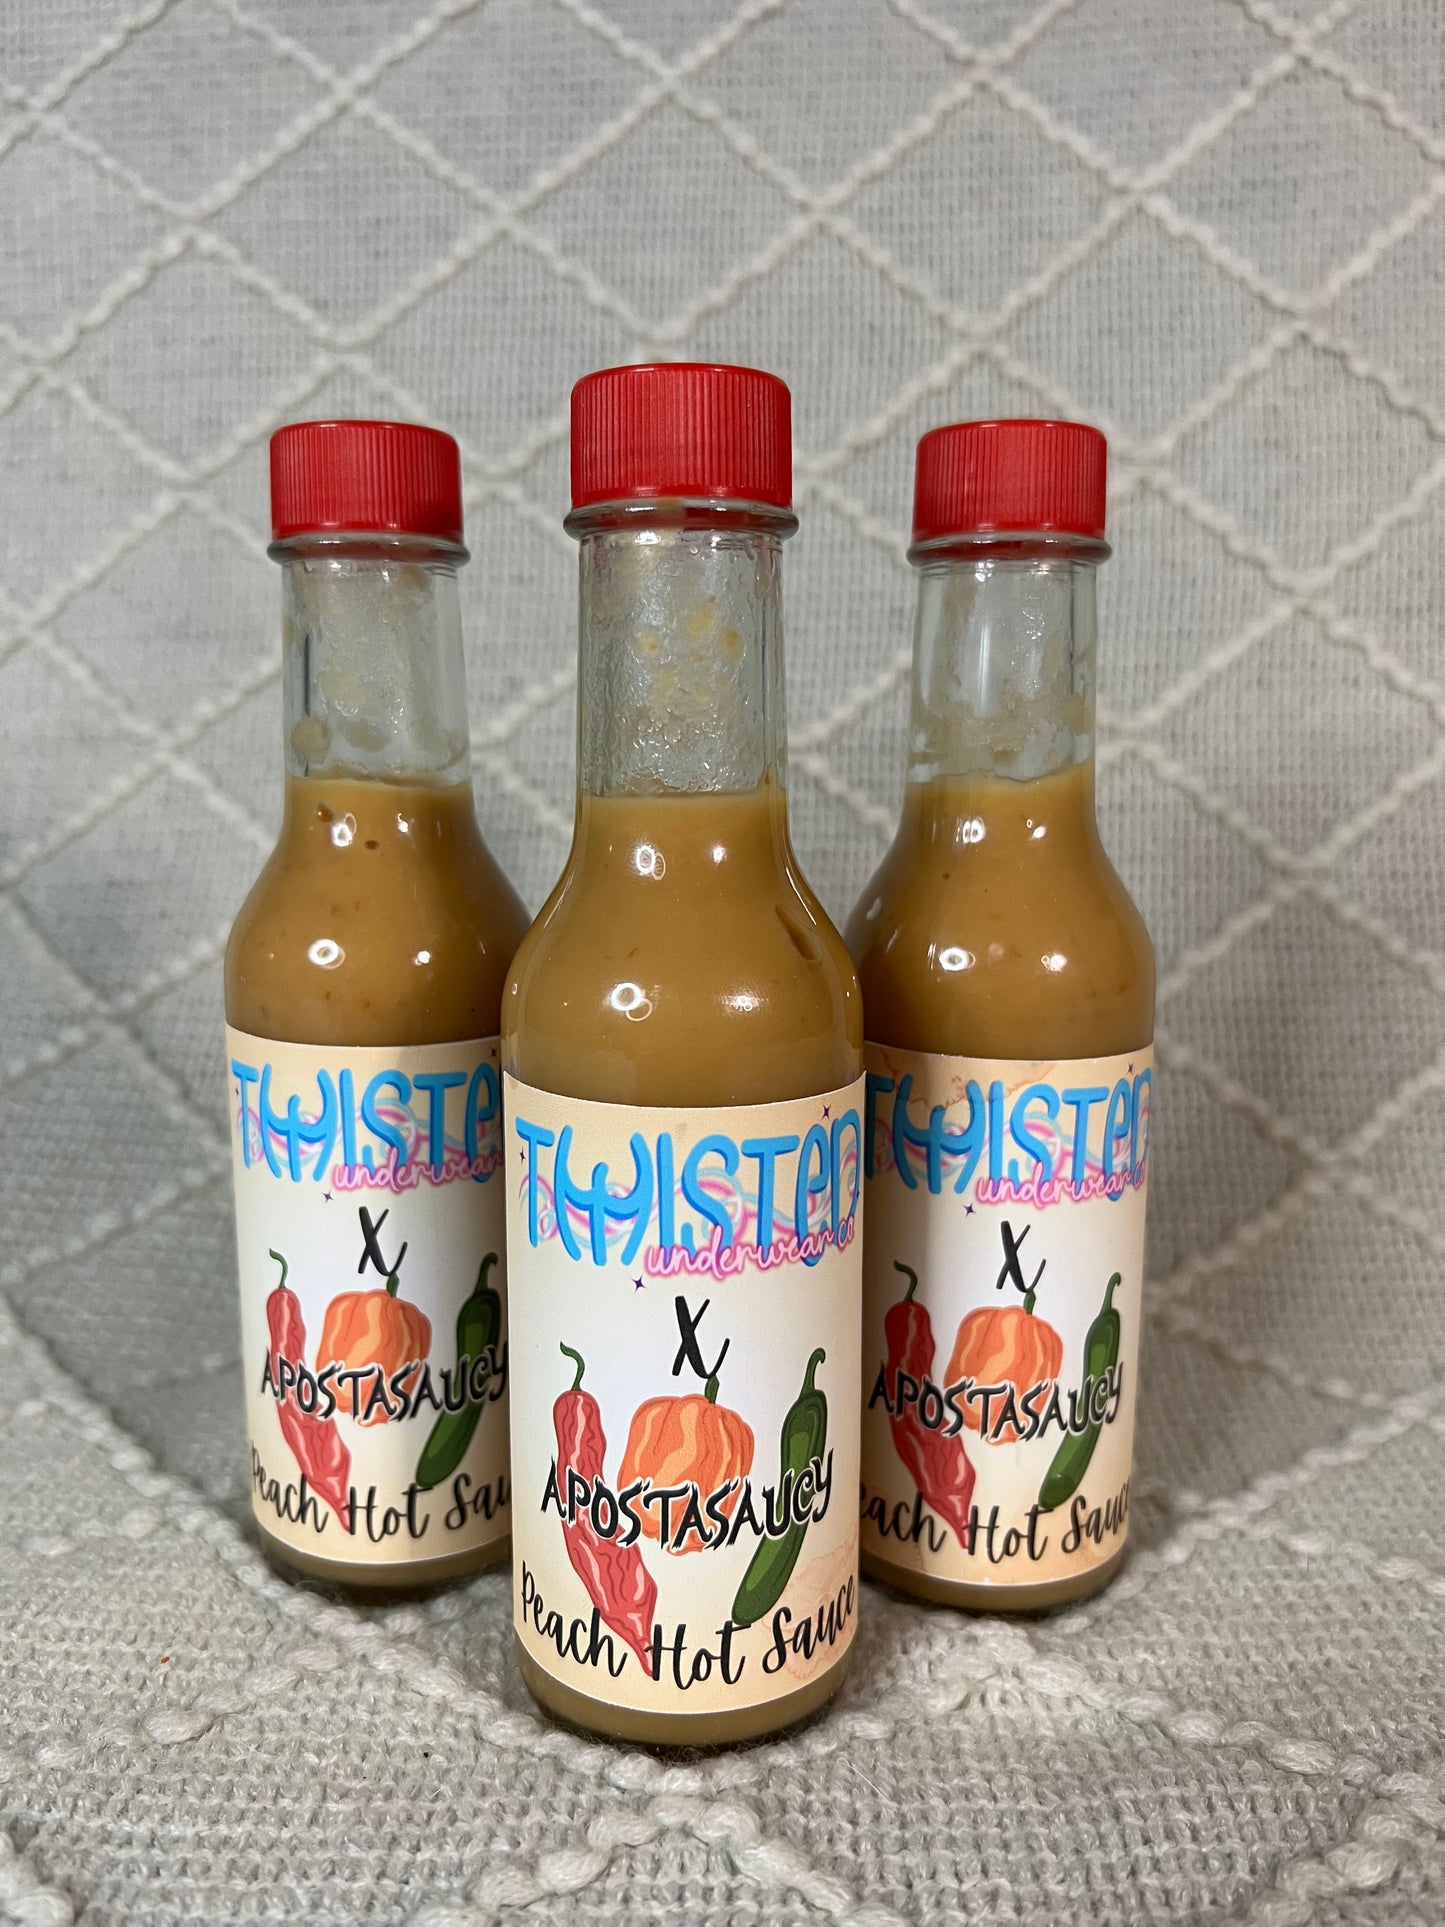 Twisted X Apostasaucy Peach Hot Sauce